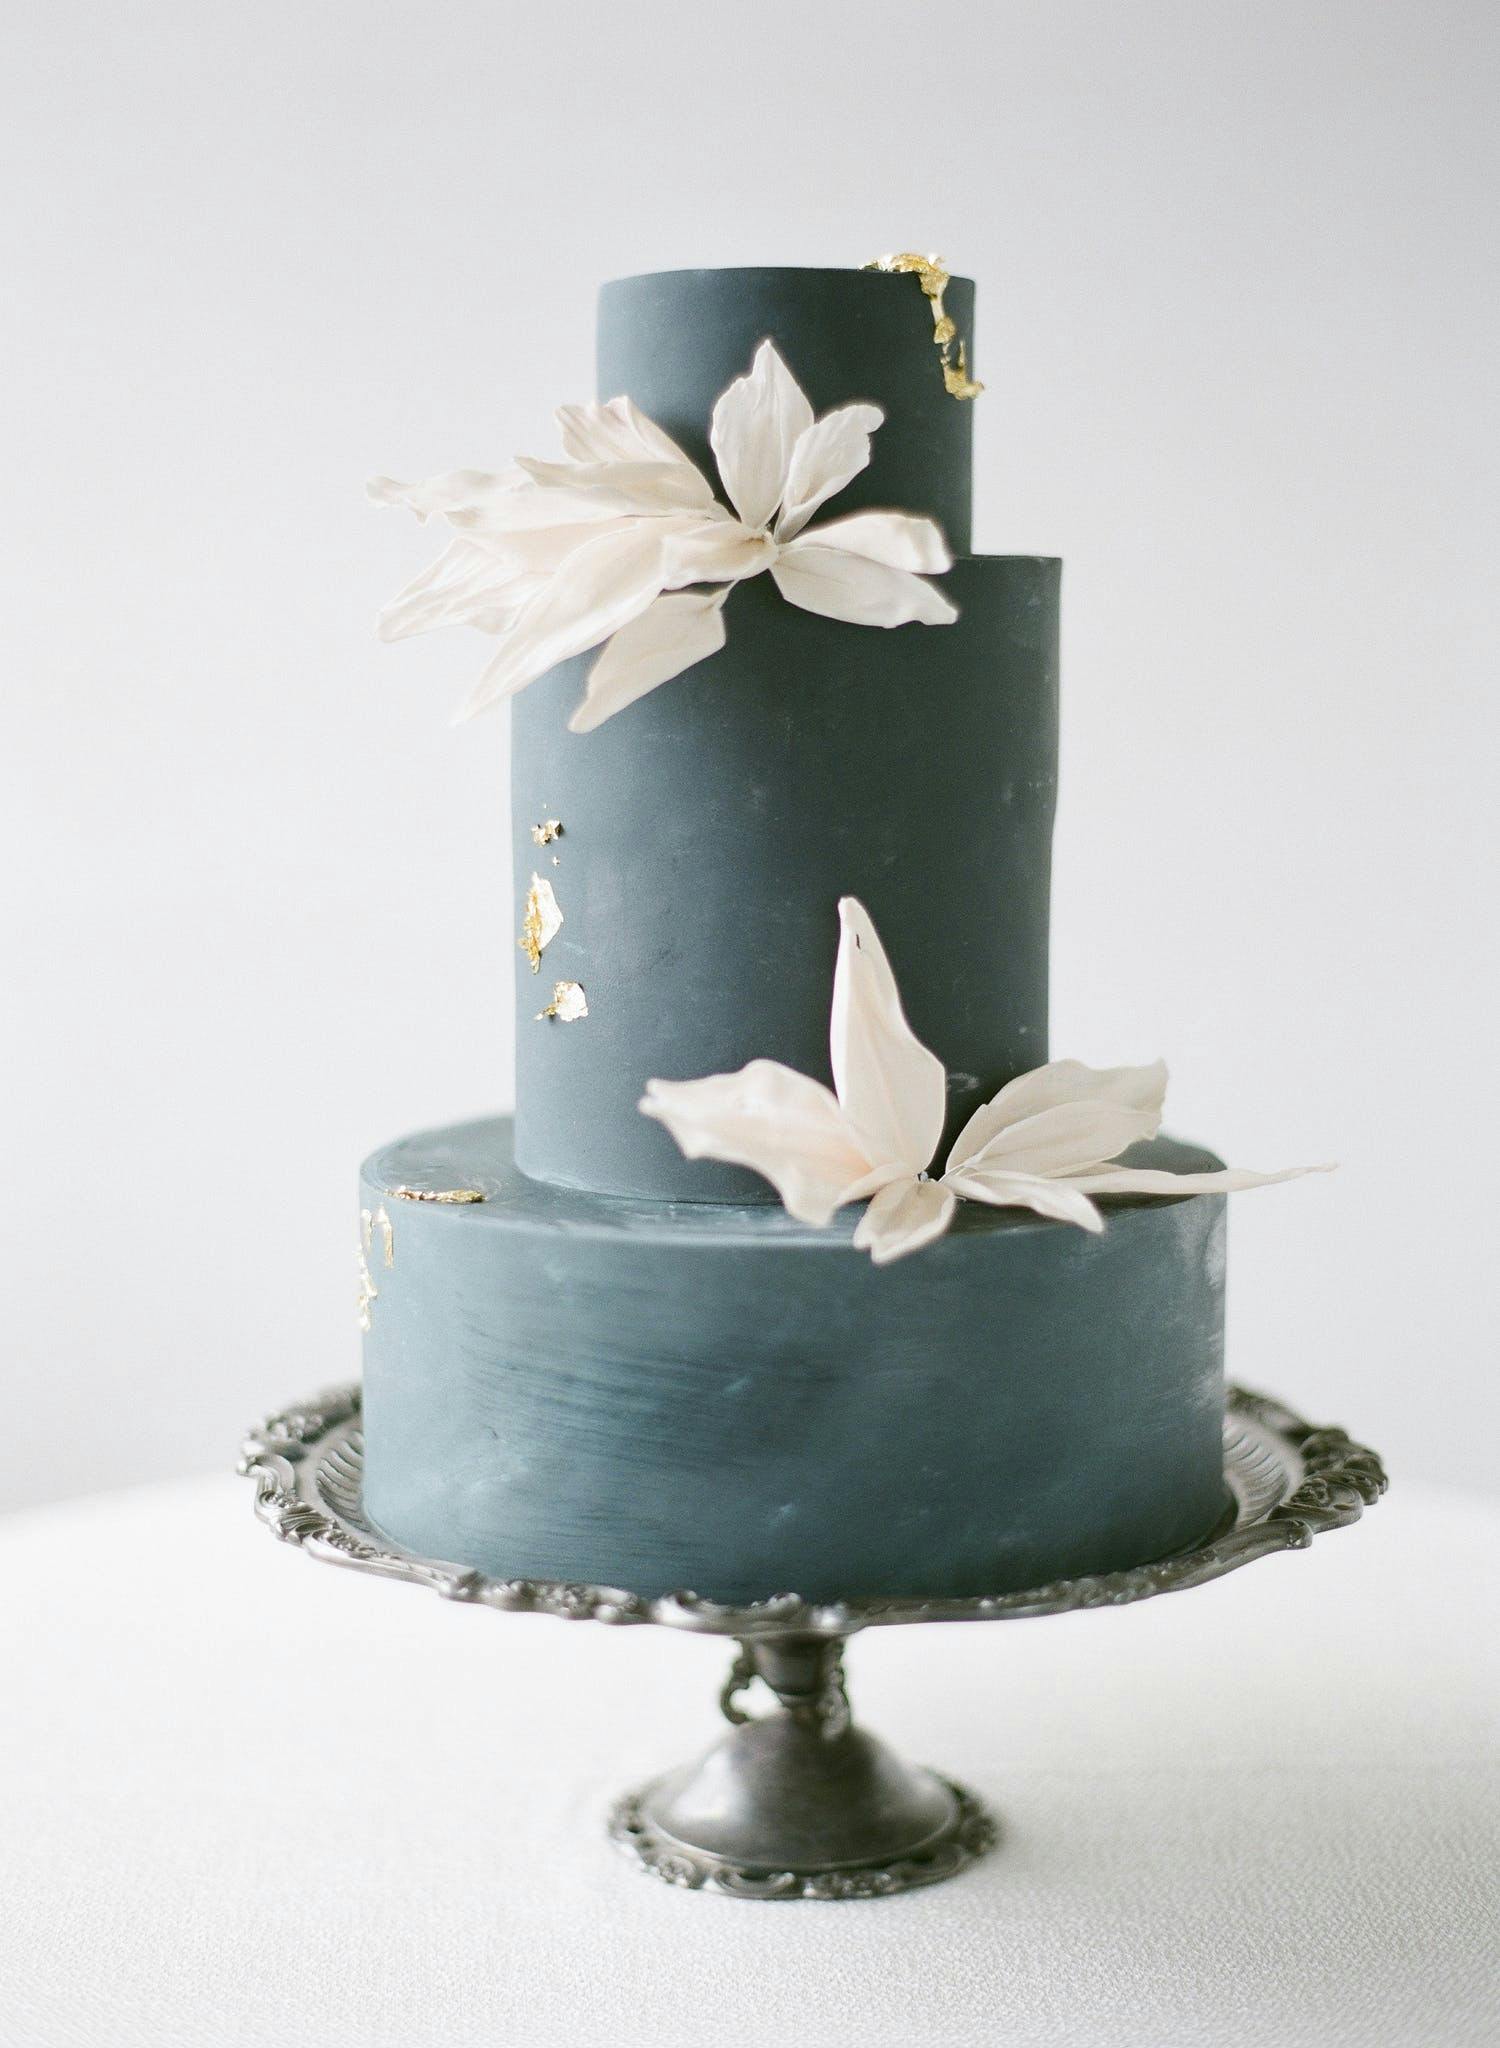 Black Monochrome Wedding Cake With Gold Details and White Blooms | PartySlate